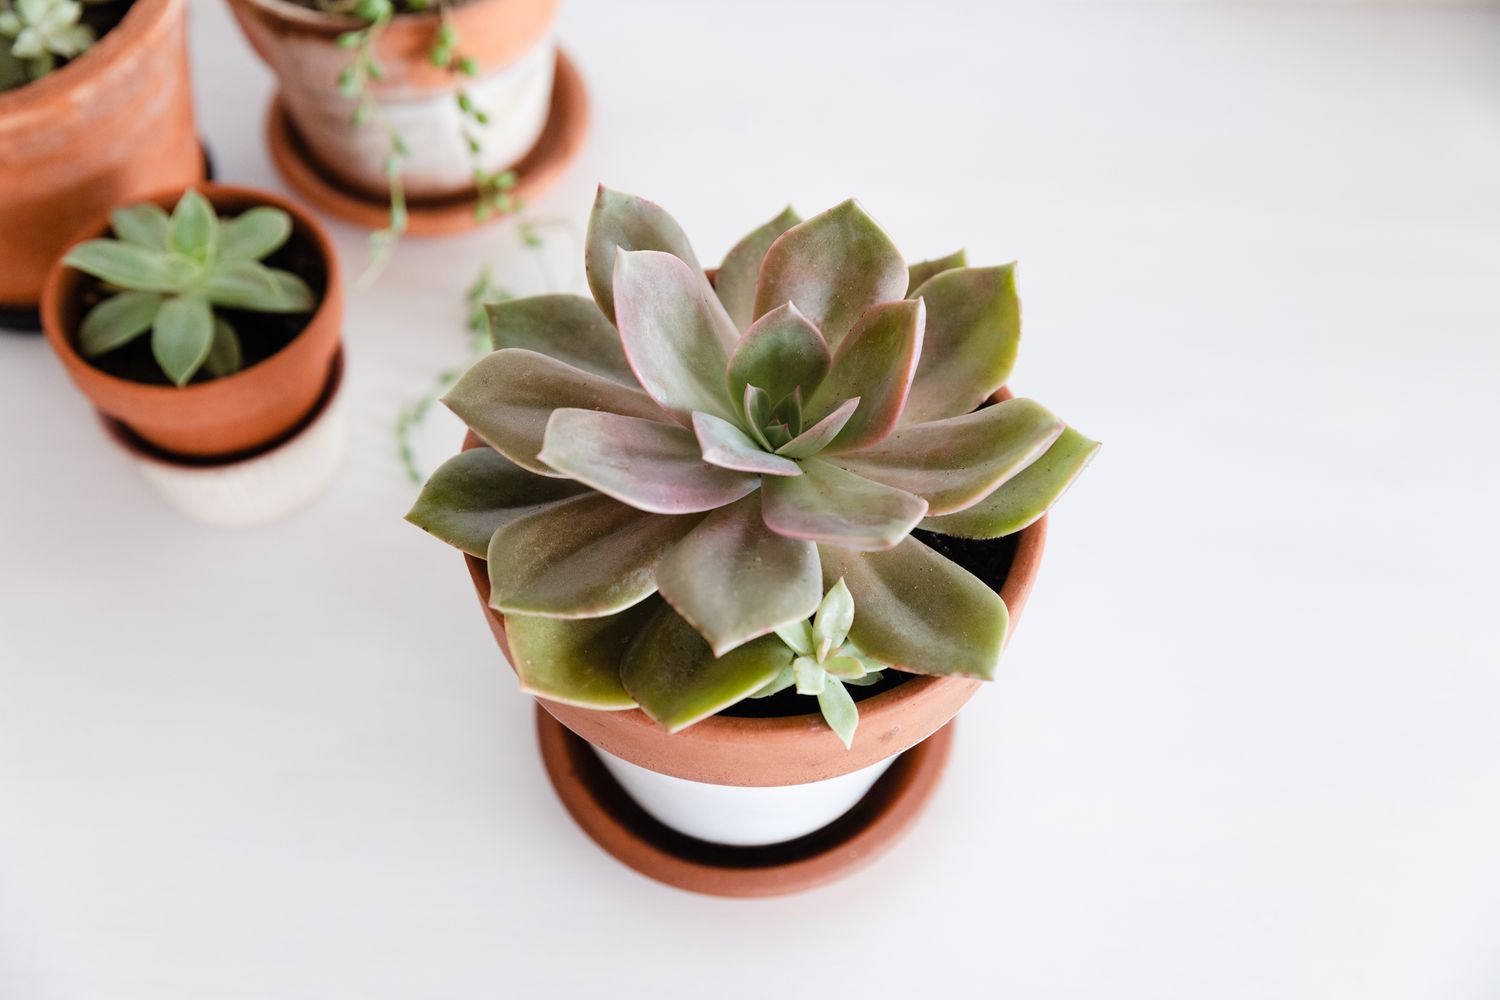 The Ultimate Guide To Repotting Succulents: When And How To Water For Optimal Growth